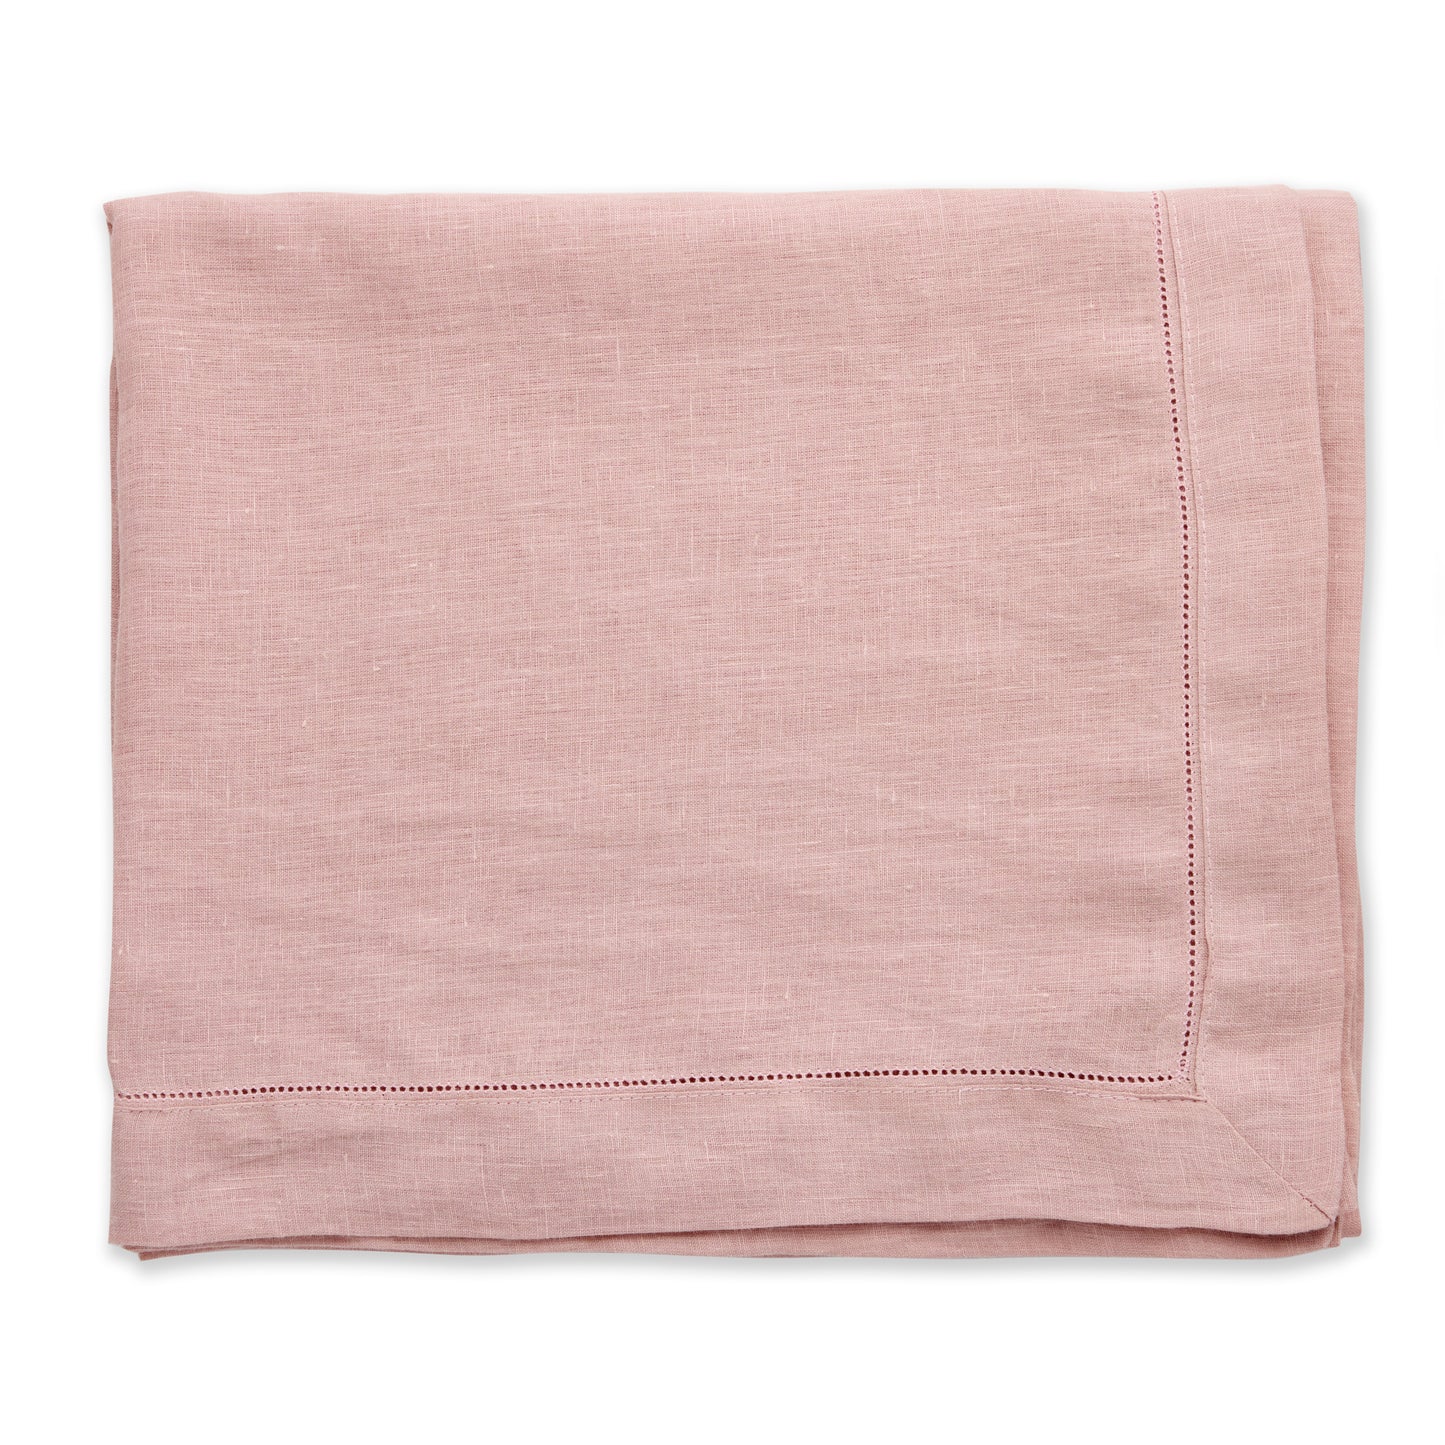 Pure Linen Tablecloth with Hemstitched Edge - Dusty Pink - 6-8 person table size